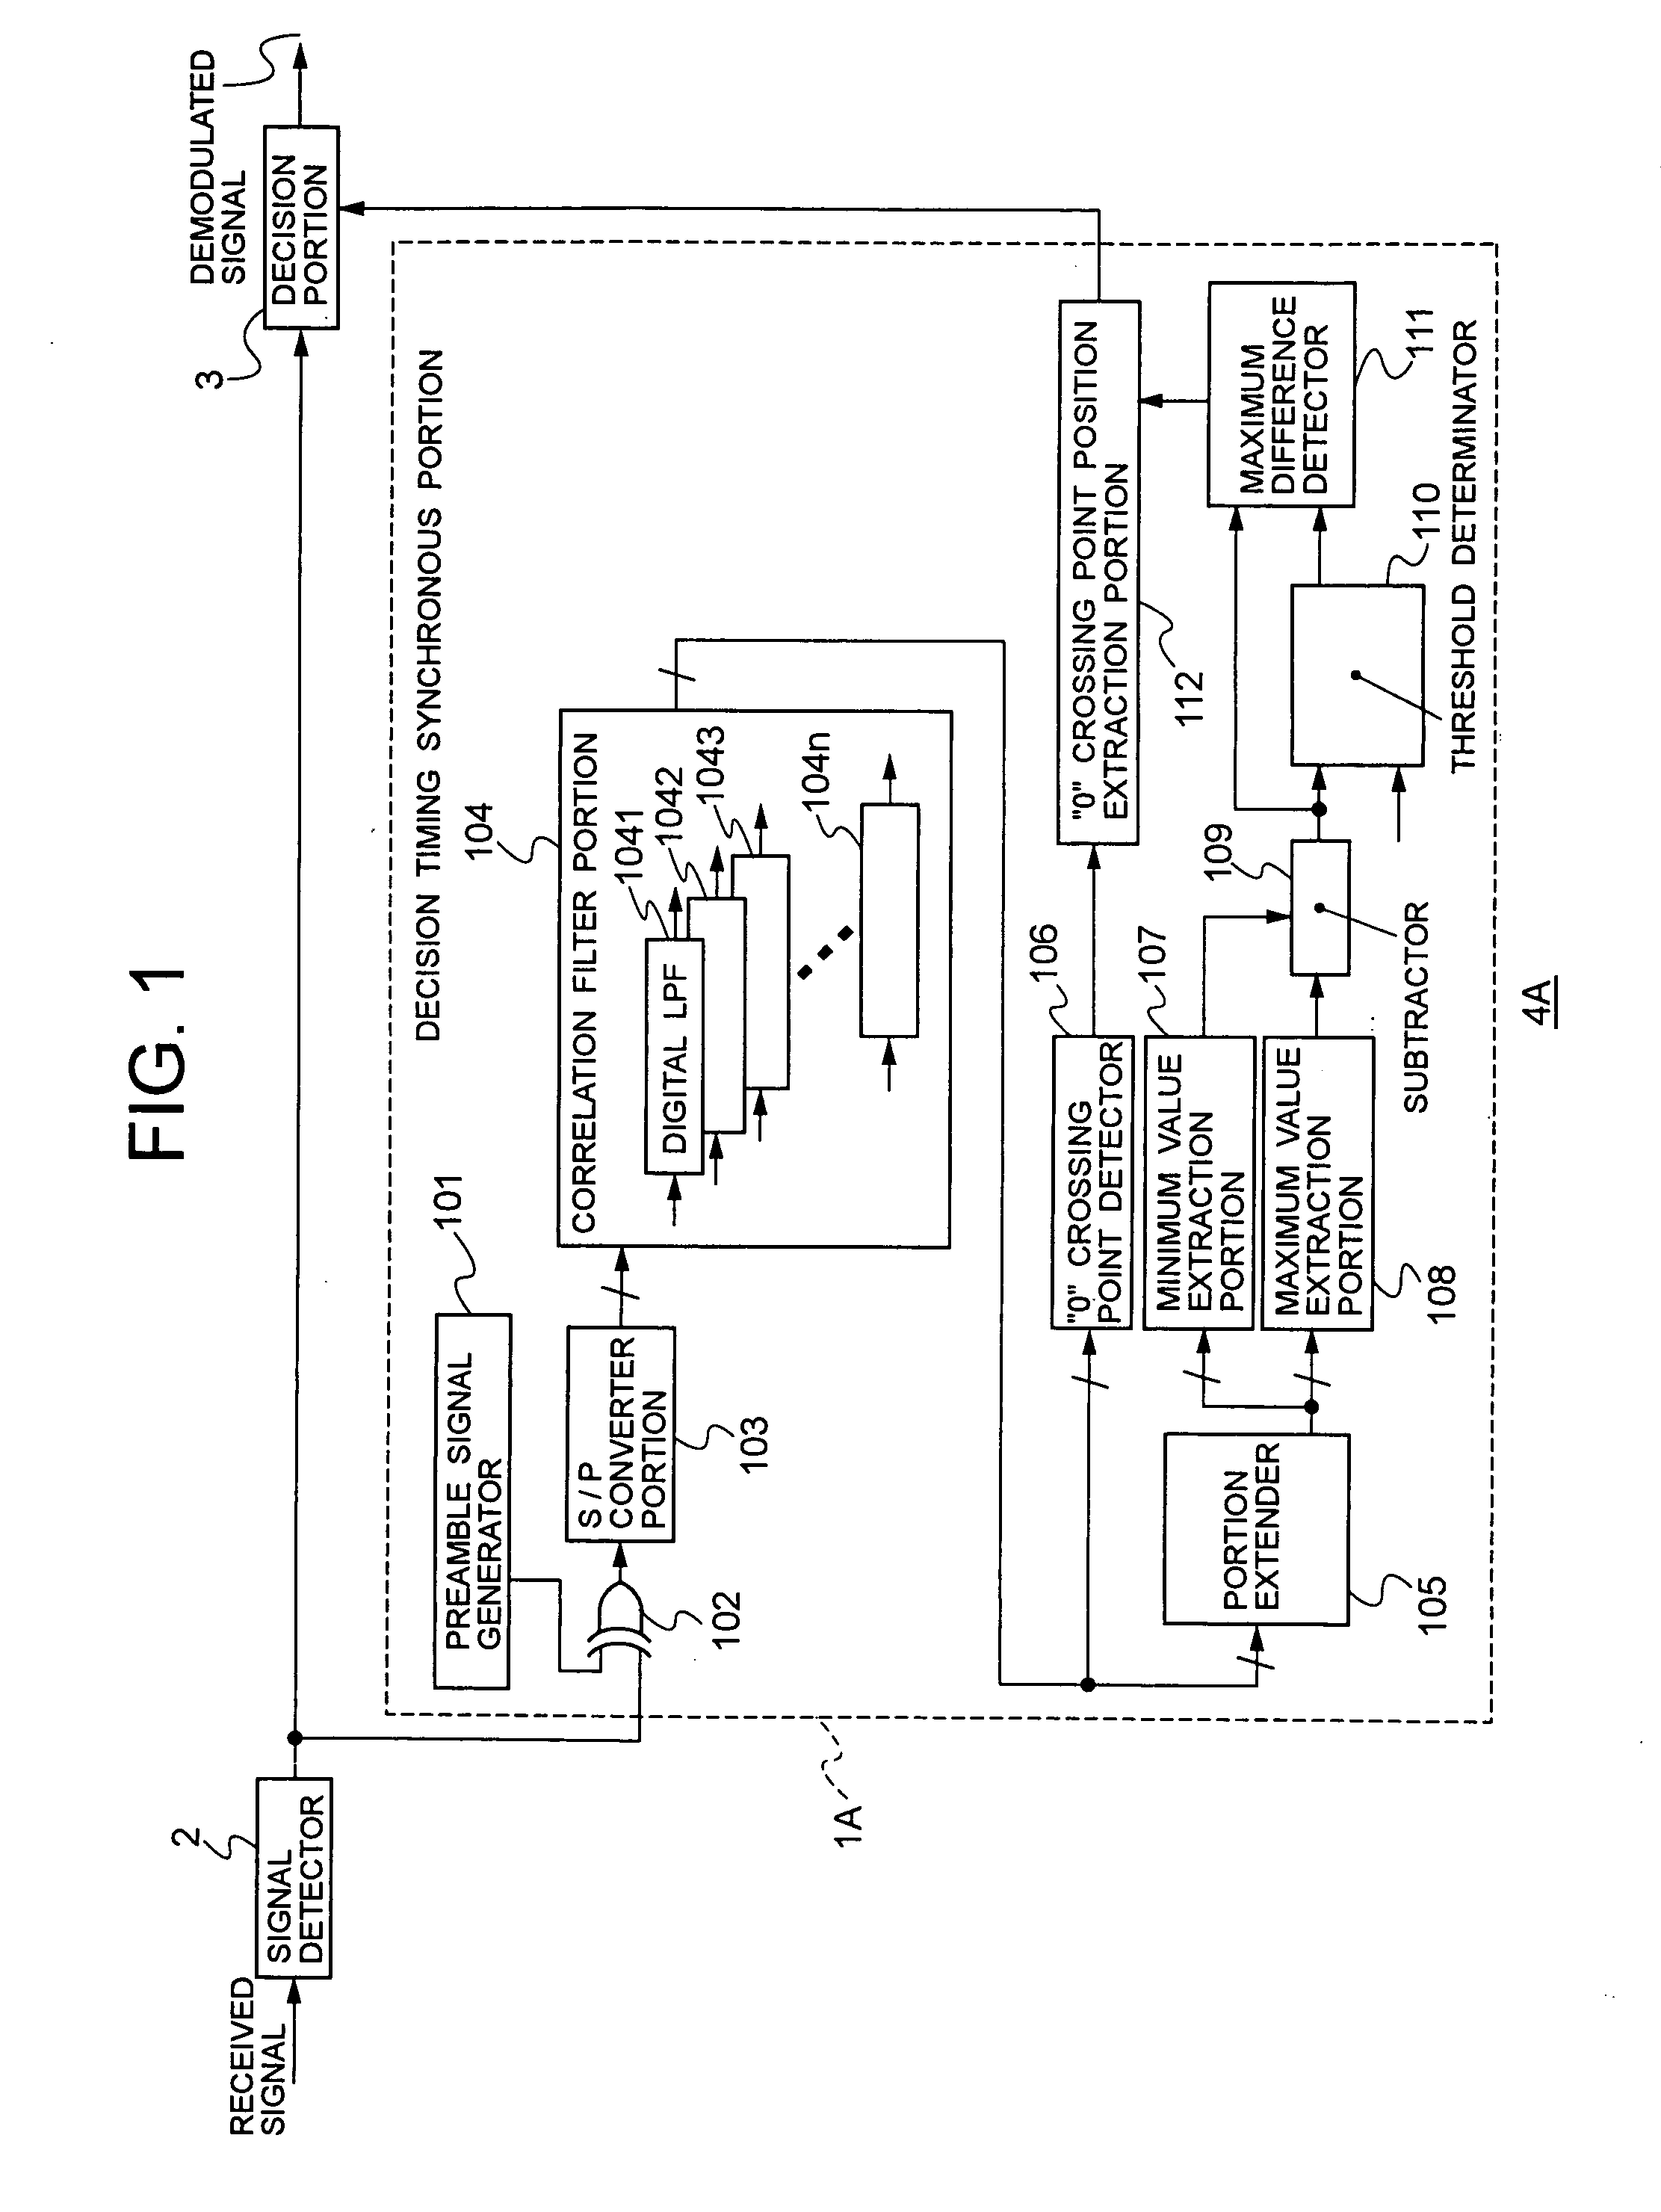 Decision timing synchronous circuit and receiver circuit